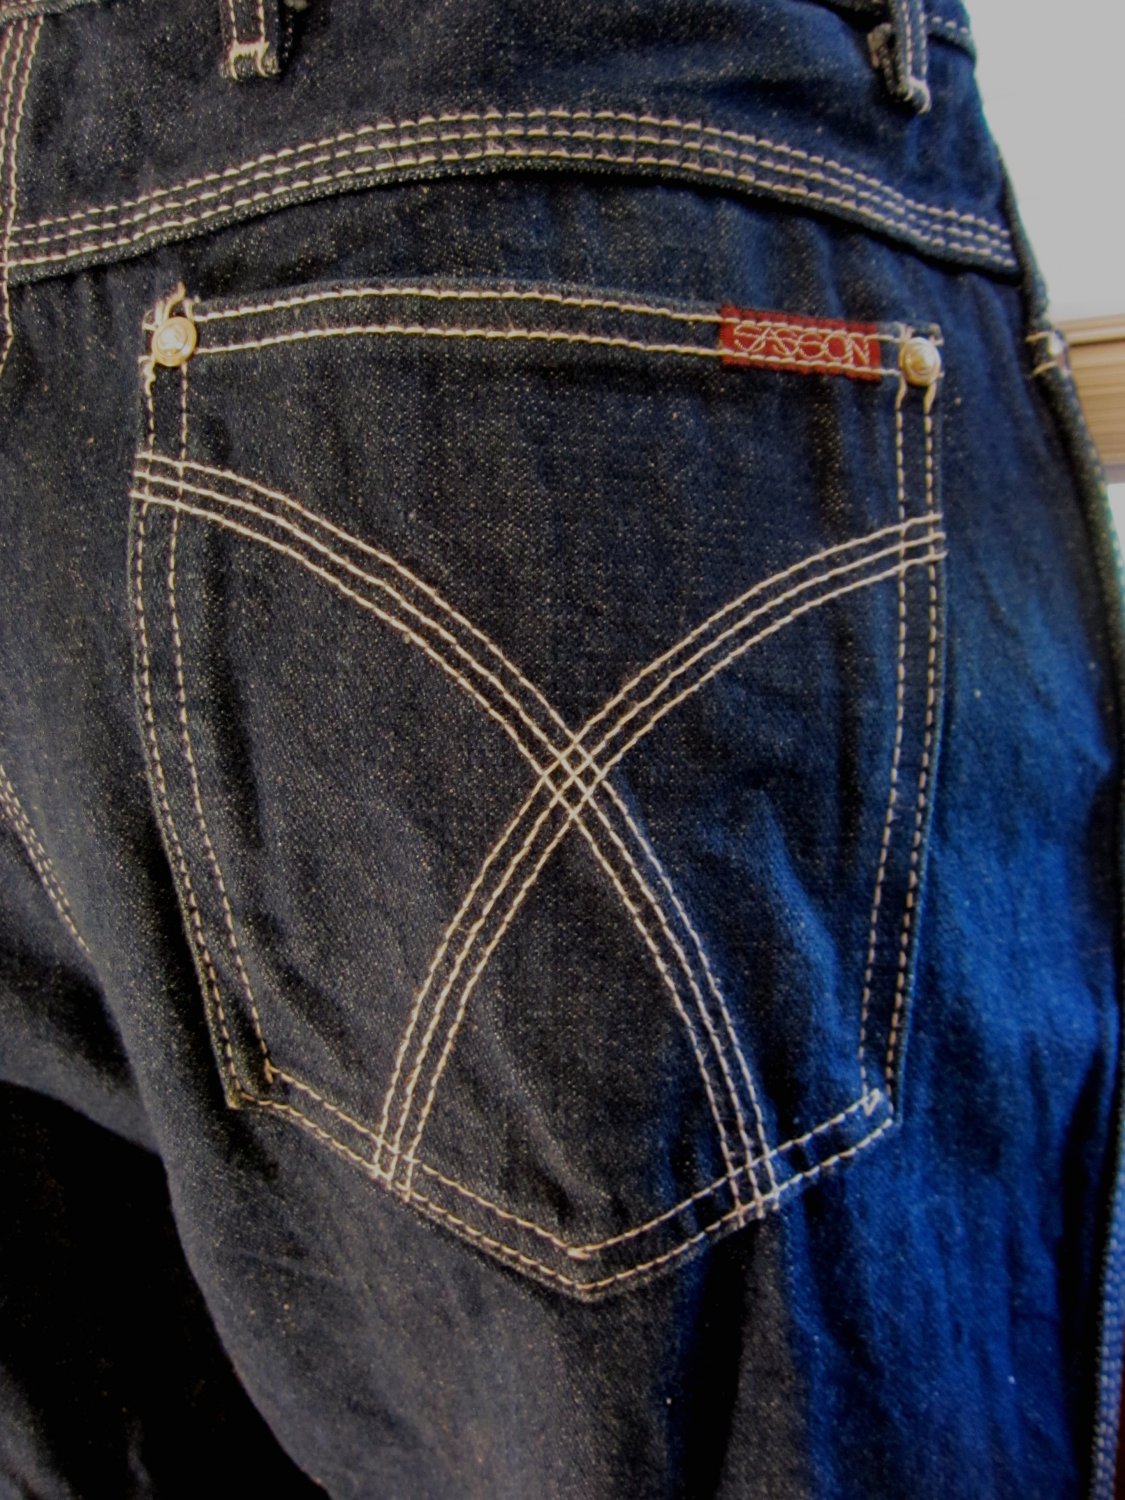 80s Jeans Porn - Showing Porn Images for Porn 80s high waisted jeans porn | www.porndaa.com